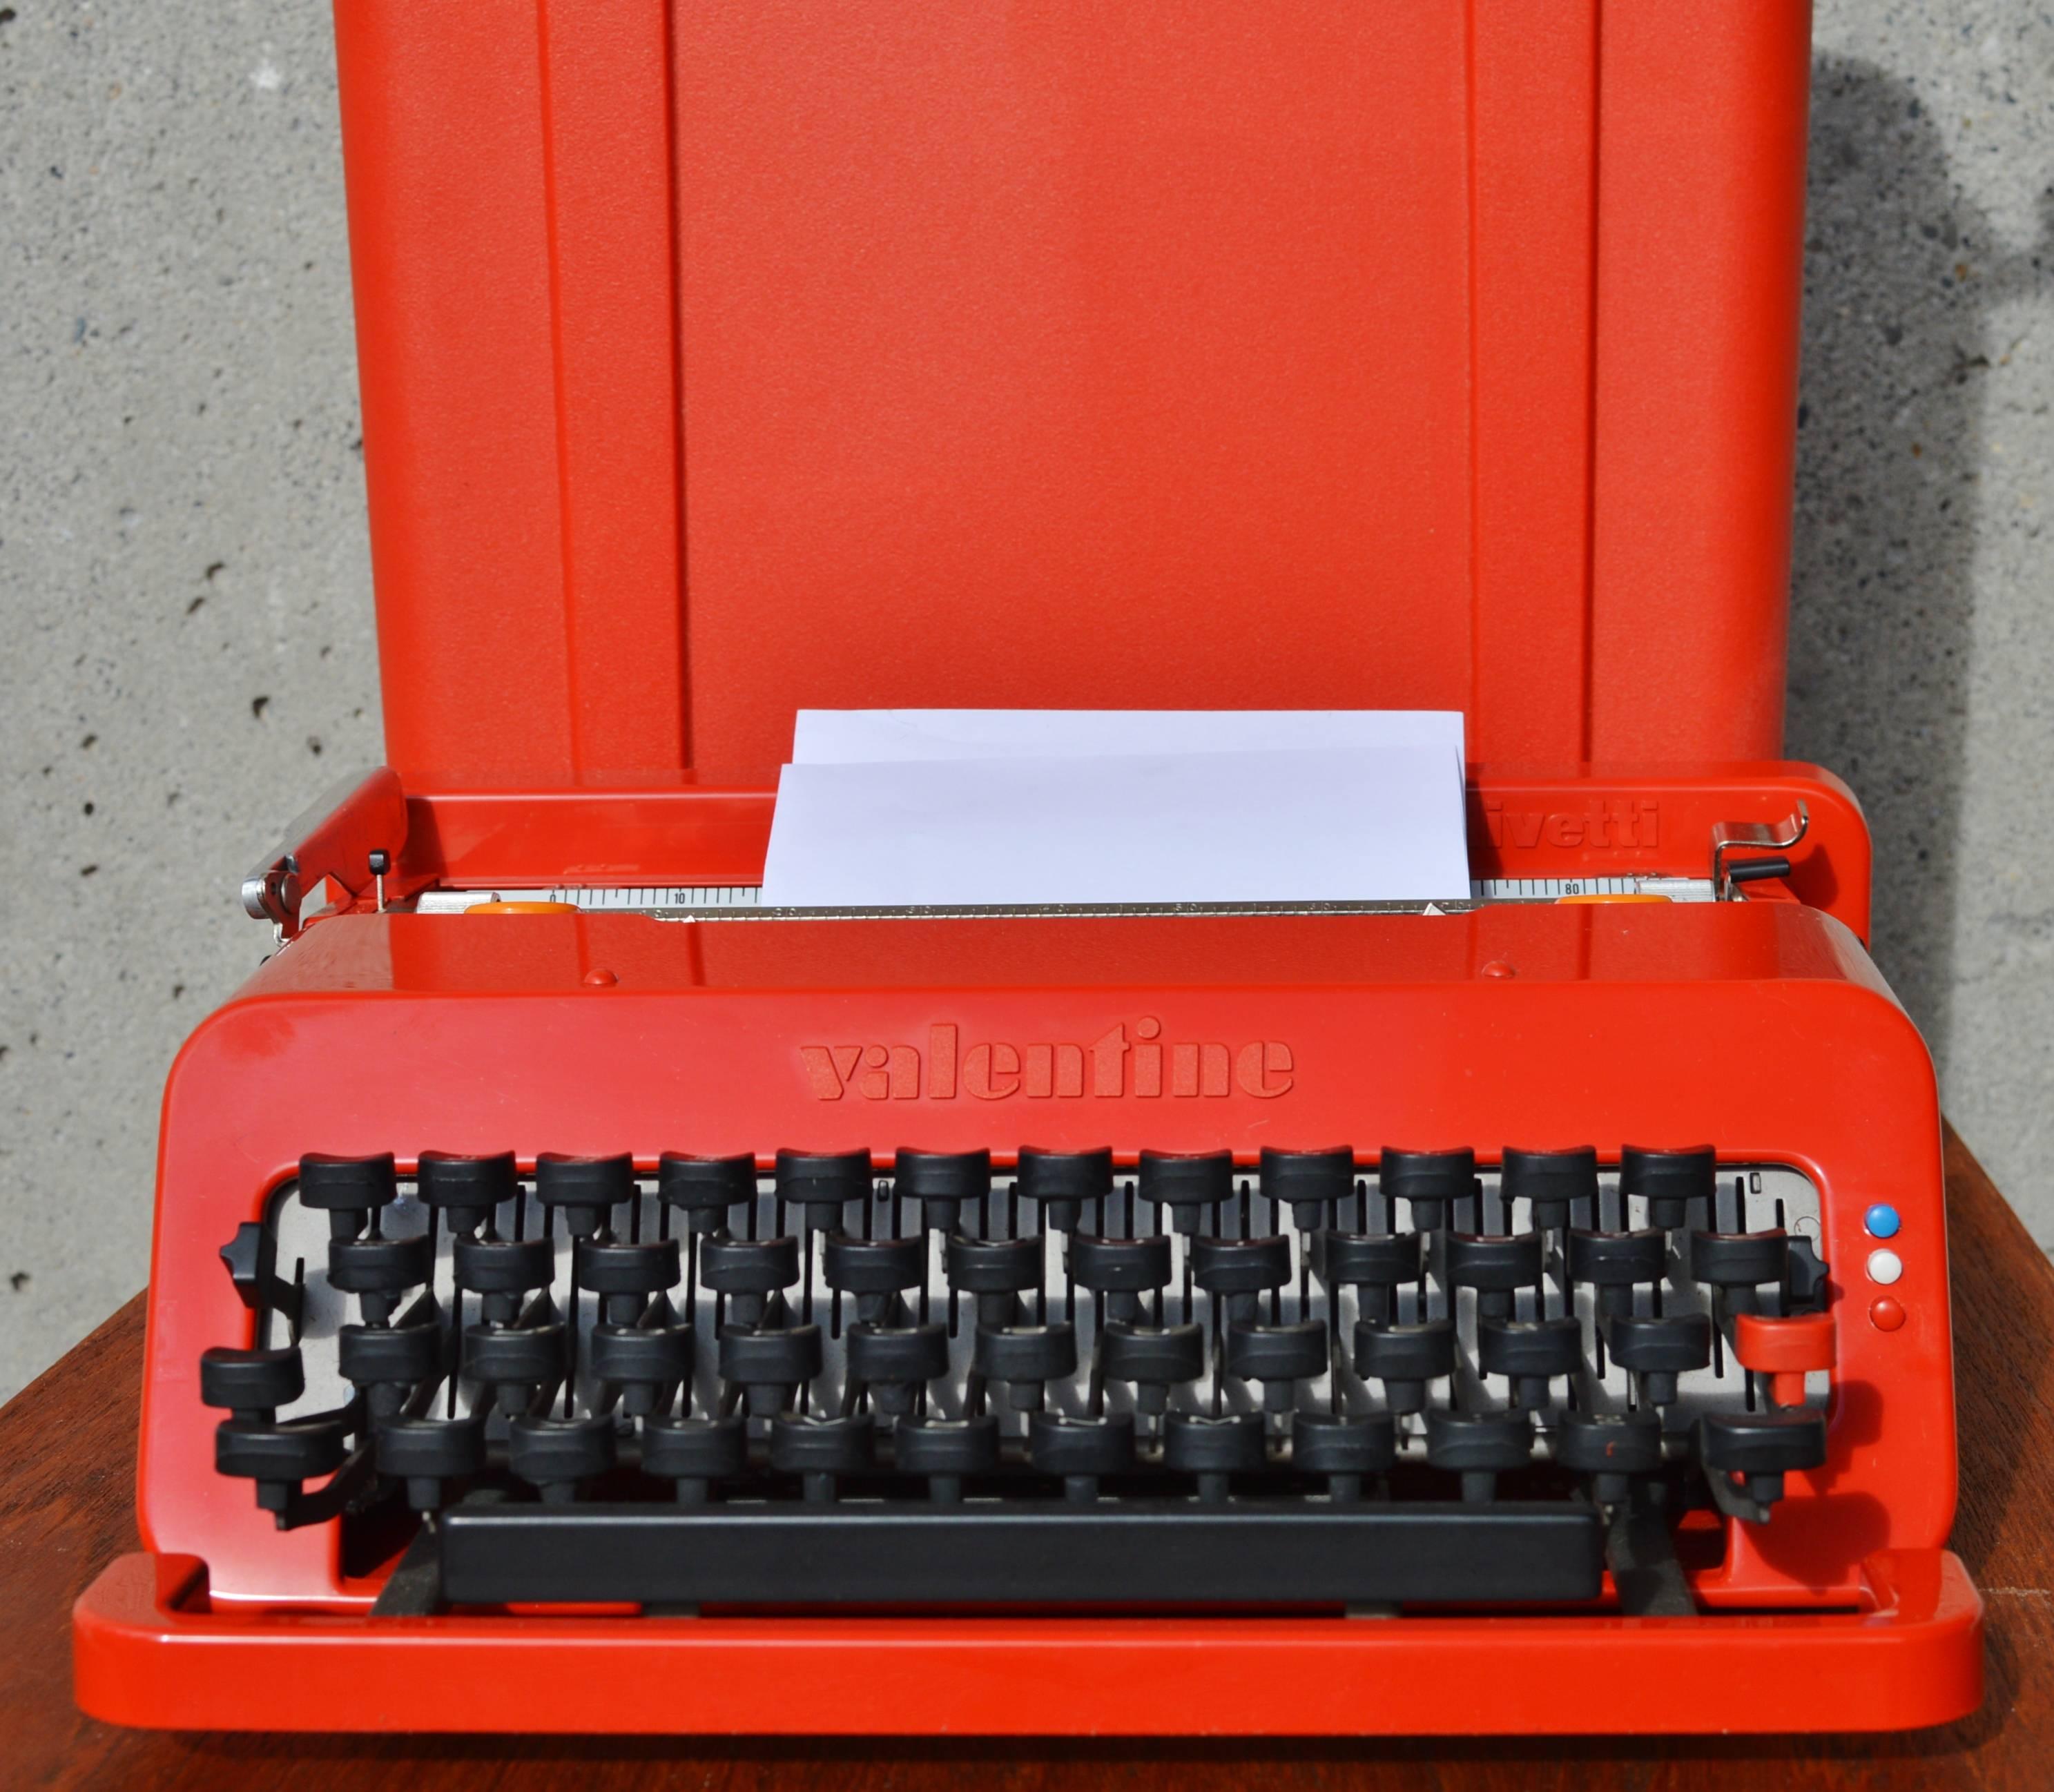 This super collectable and fun bright red Olivetti Valentine typewriter was designed by Ettore Sottsass (Italy) in the 1960s. Note how the back of the typewriter becomes the lid for the carrying case with black rubber clasps. Fully functional, the